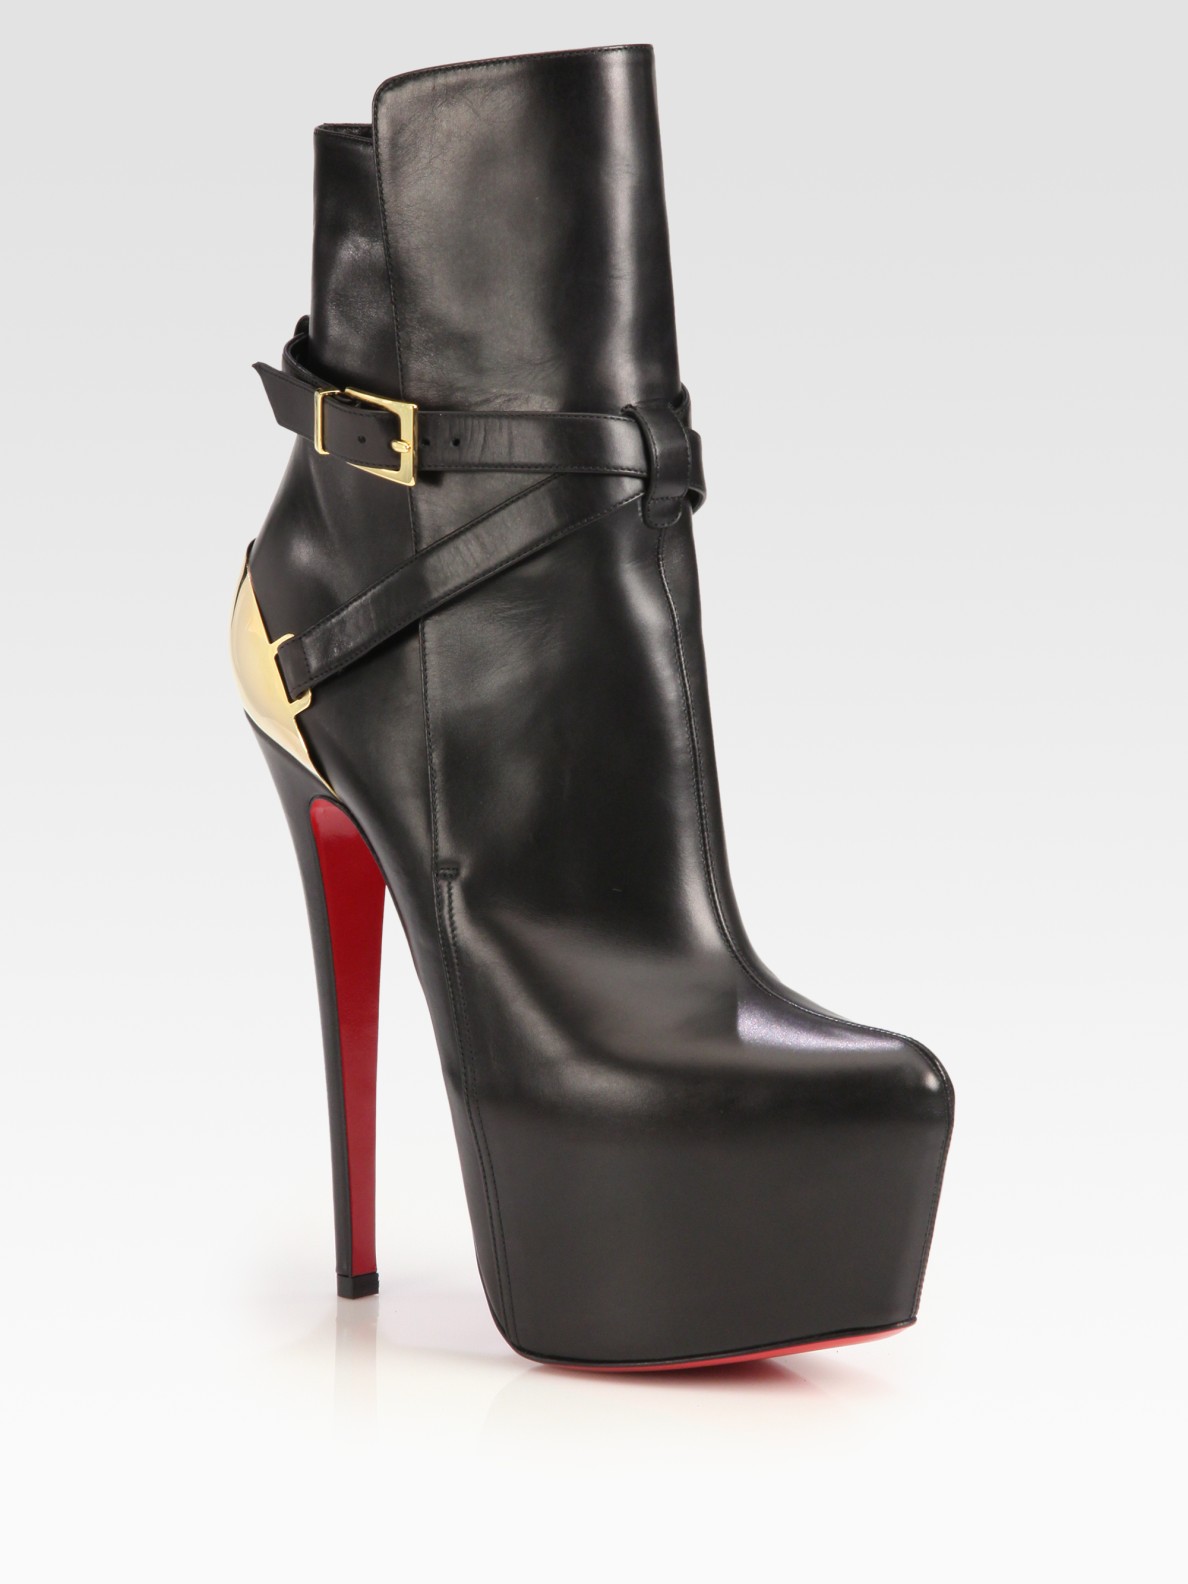 Christian Louboutin Equestria 160m Leather Platform Ankle Boots in Black - Lyst